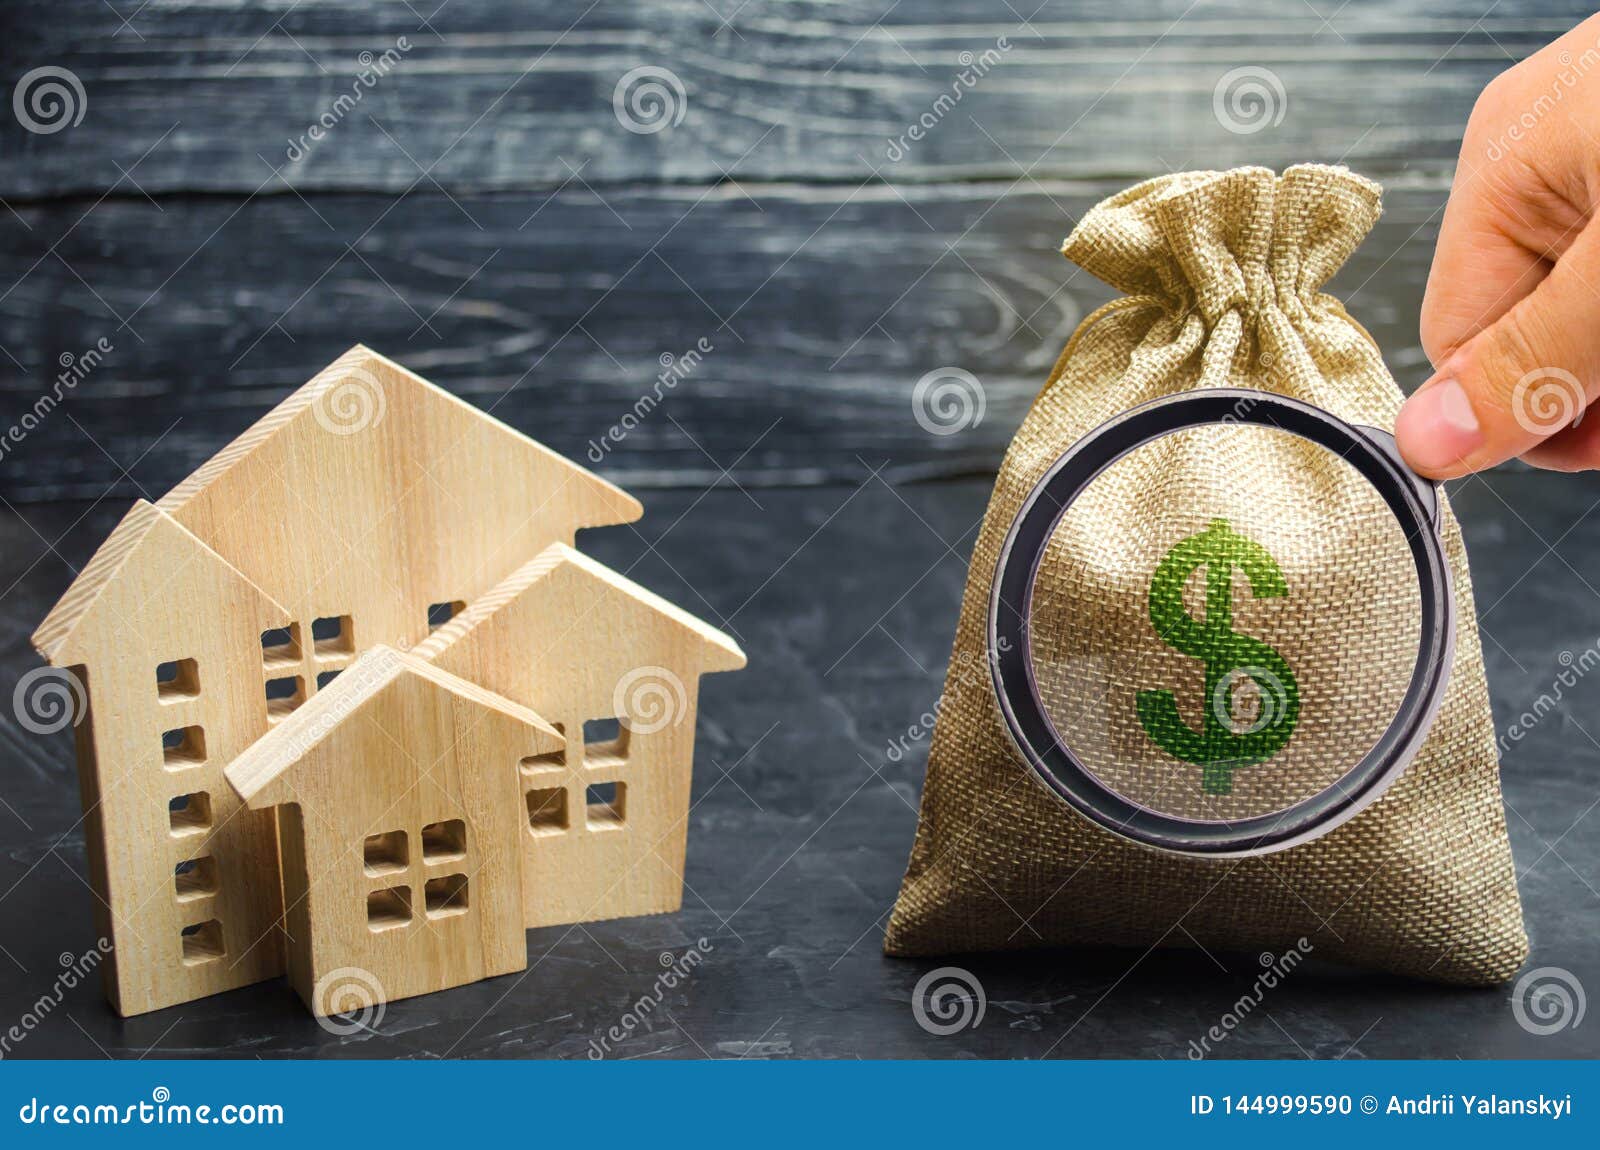 a bag with money and wooden houses. selling a house. apartment purchase. real estate market. rental housing for rent. home prices